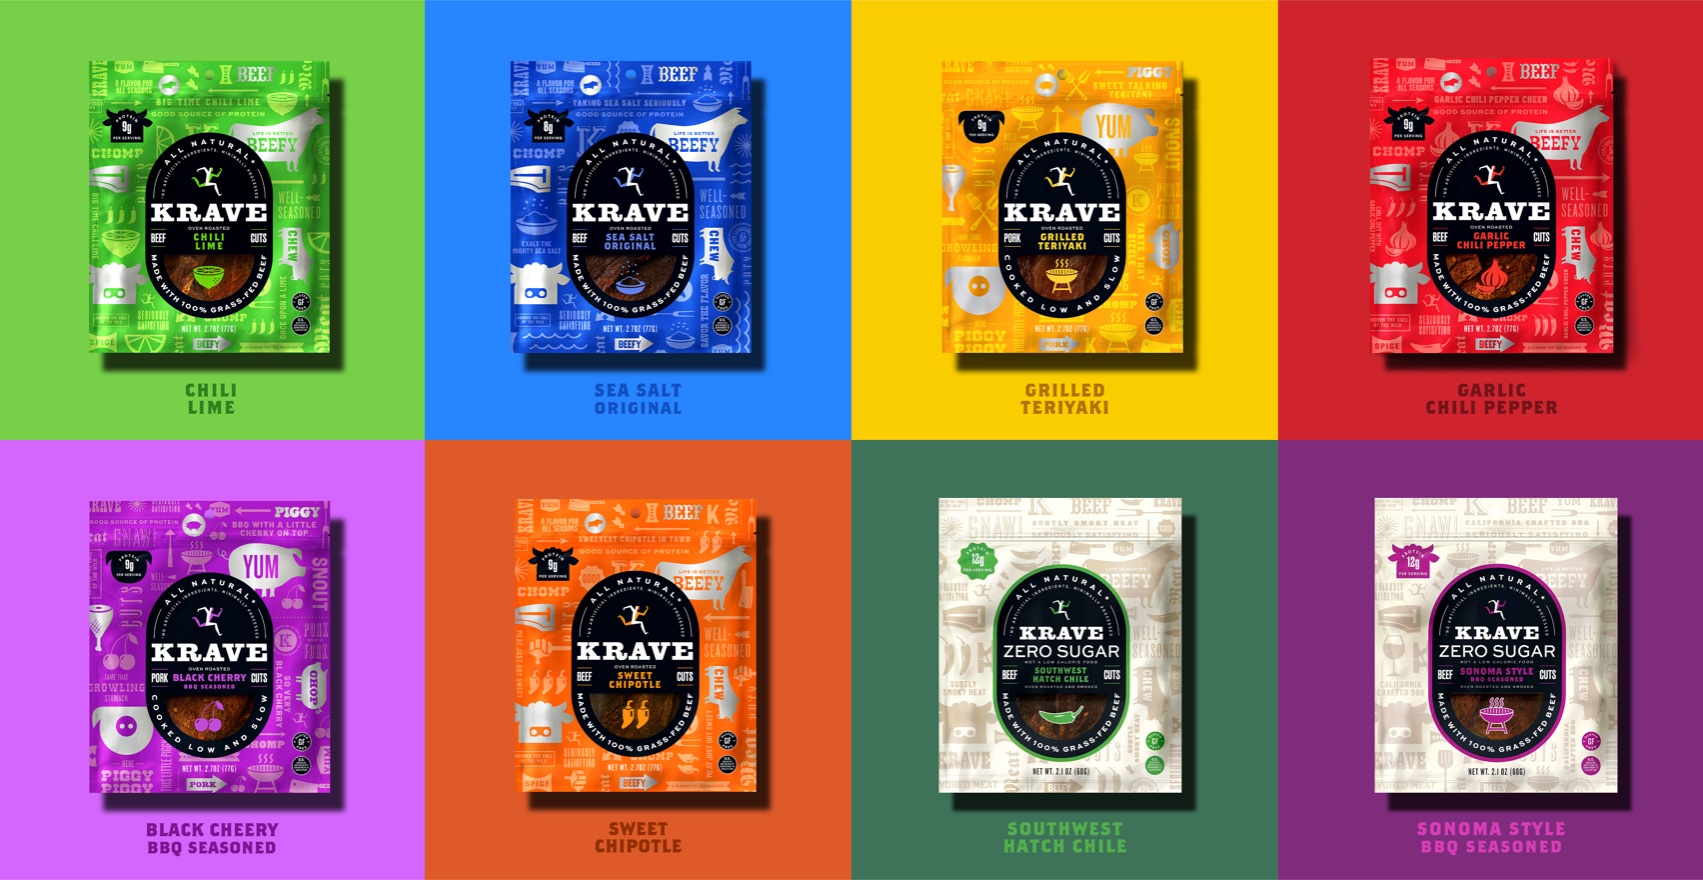 KRAVE Jerky’s Revamped Packaging System Gives The Brand A Hint Of Edge